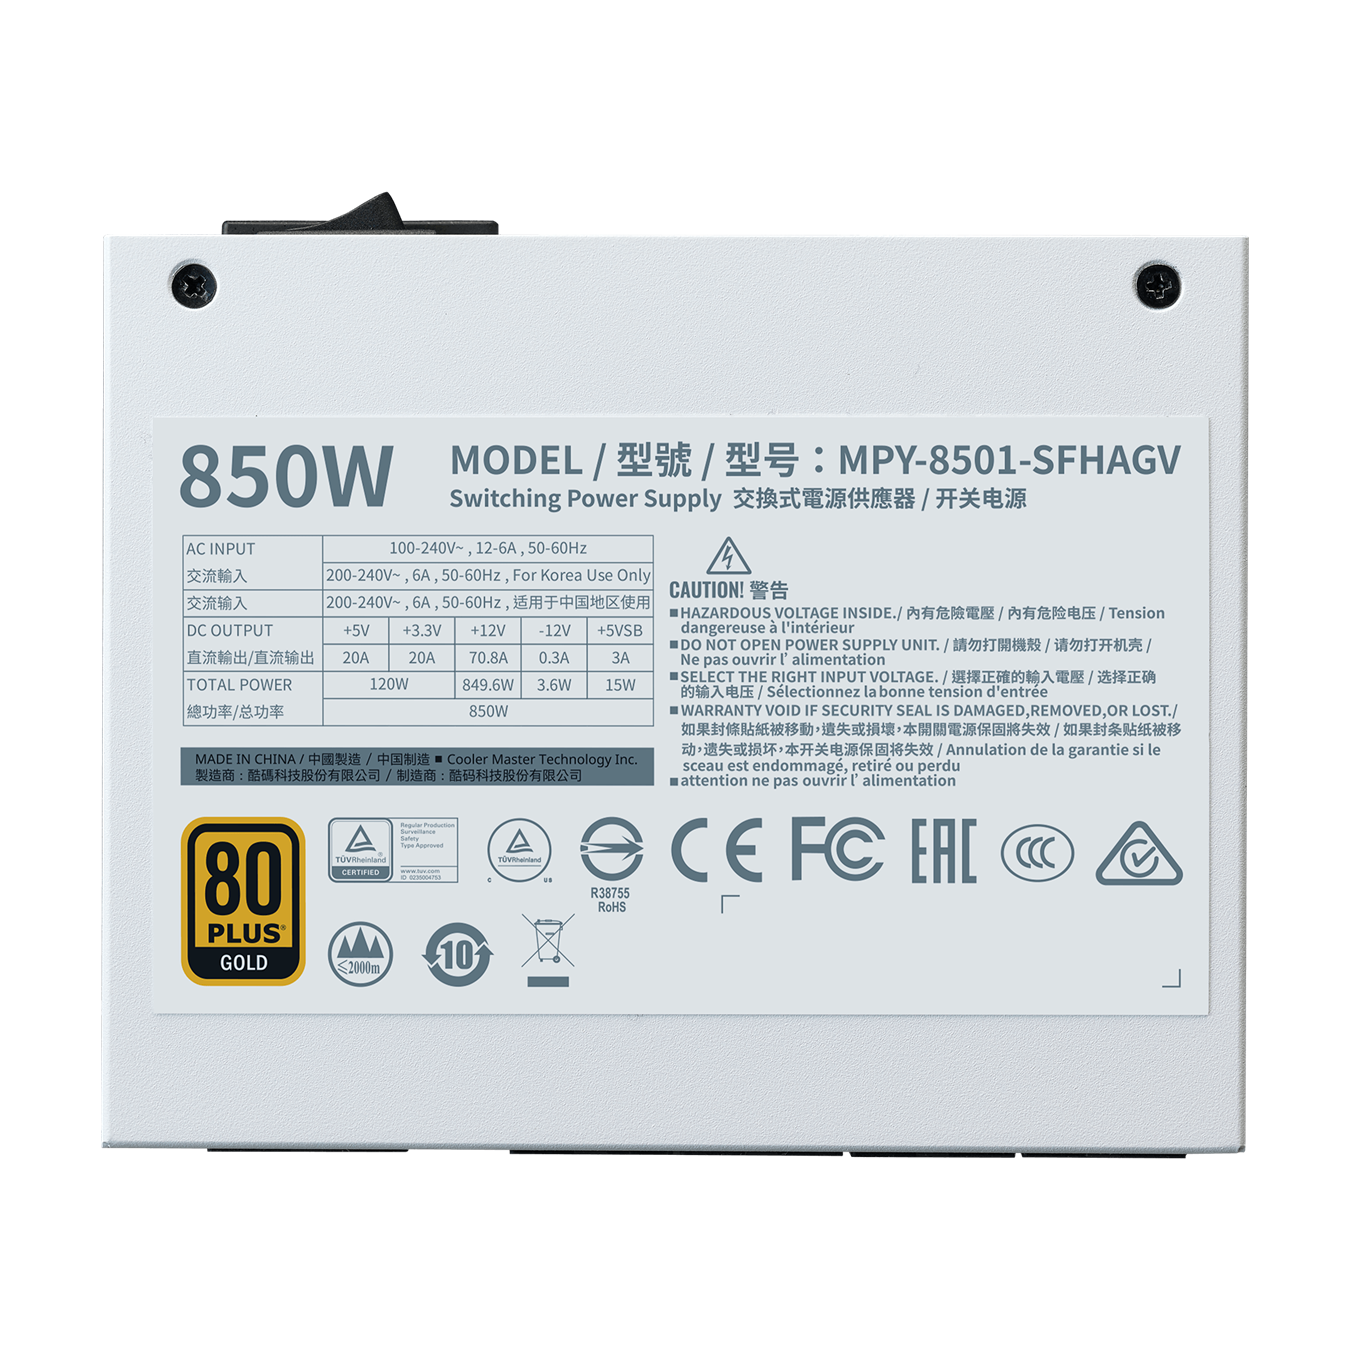 V850 SFX Gold White Edition - power rating label